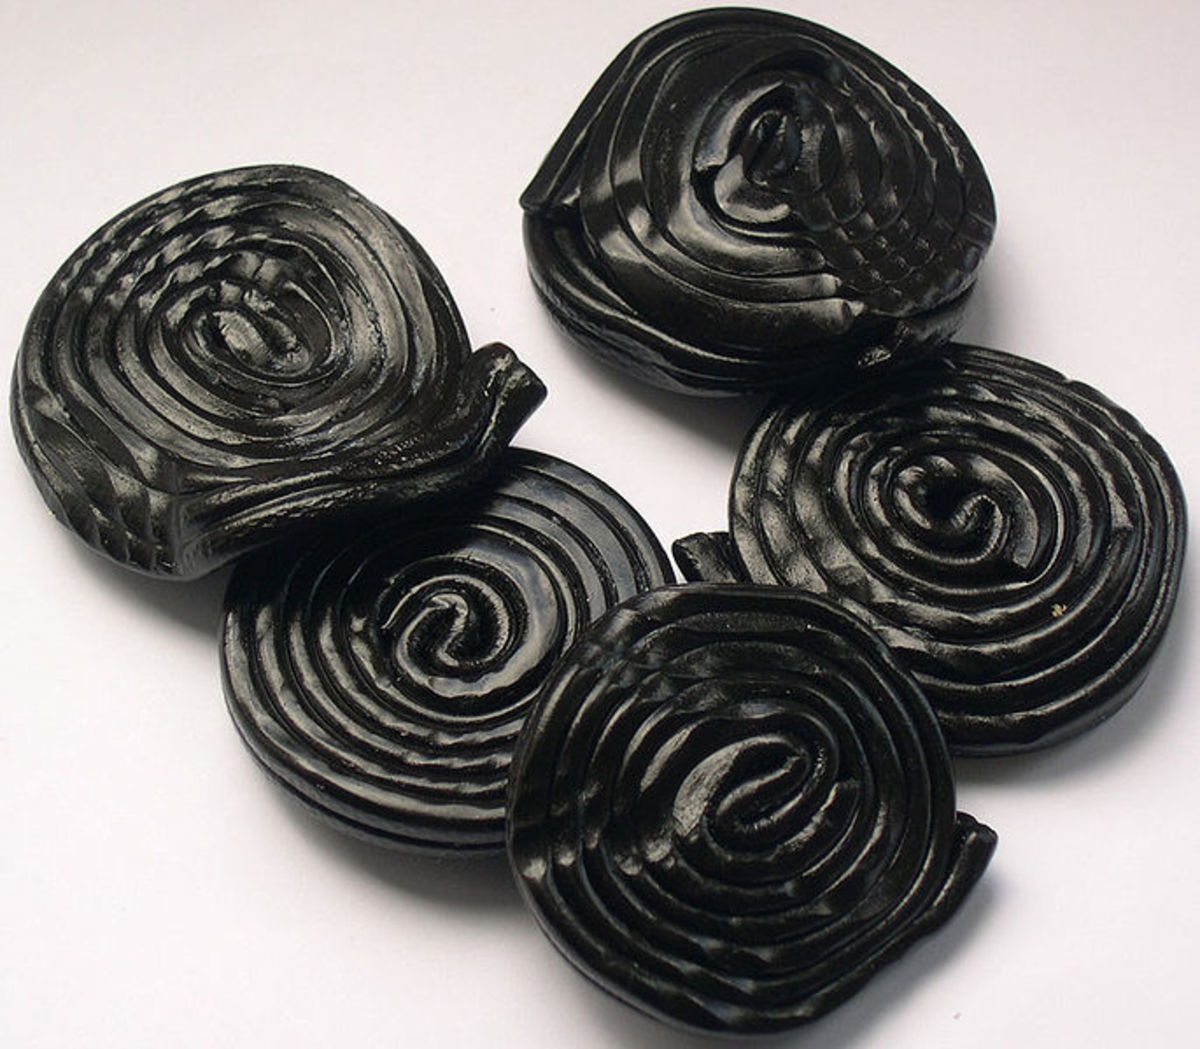 The Uses, Benefits, and Dangers of Liquorice